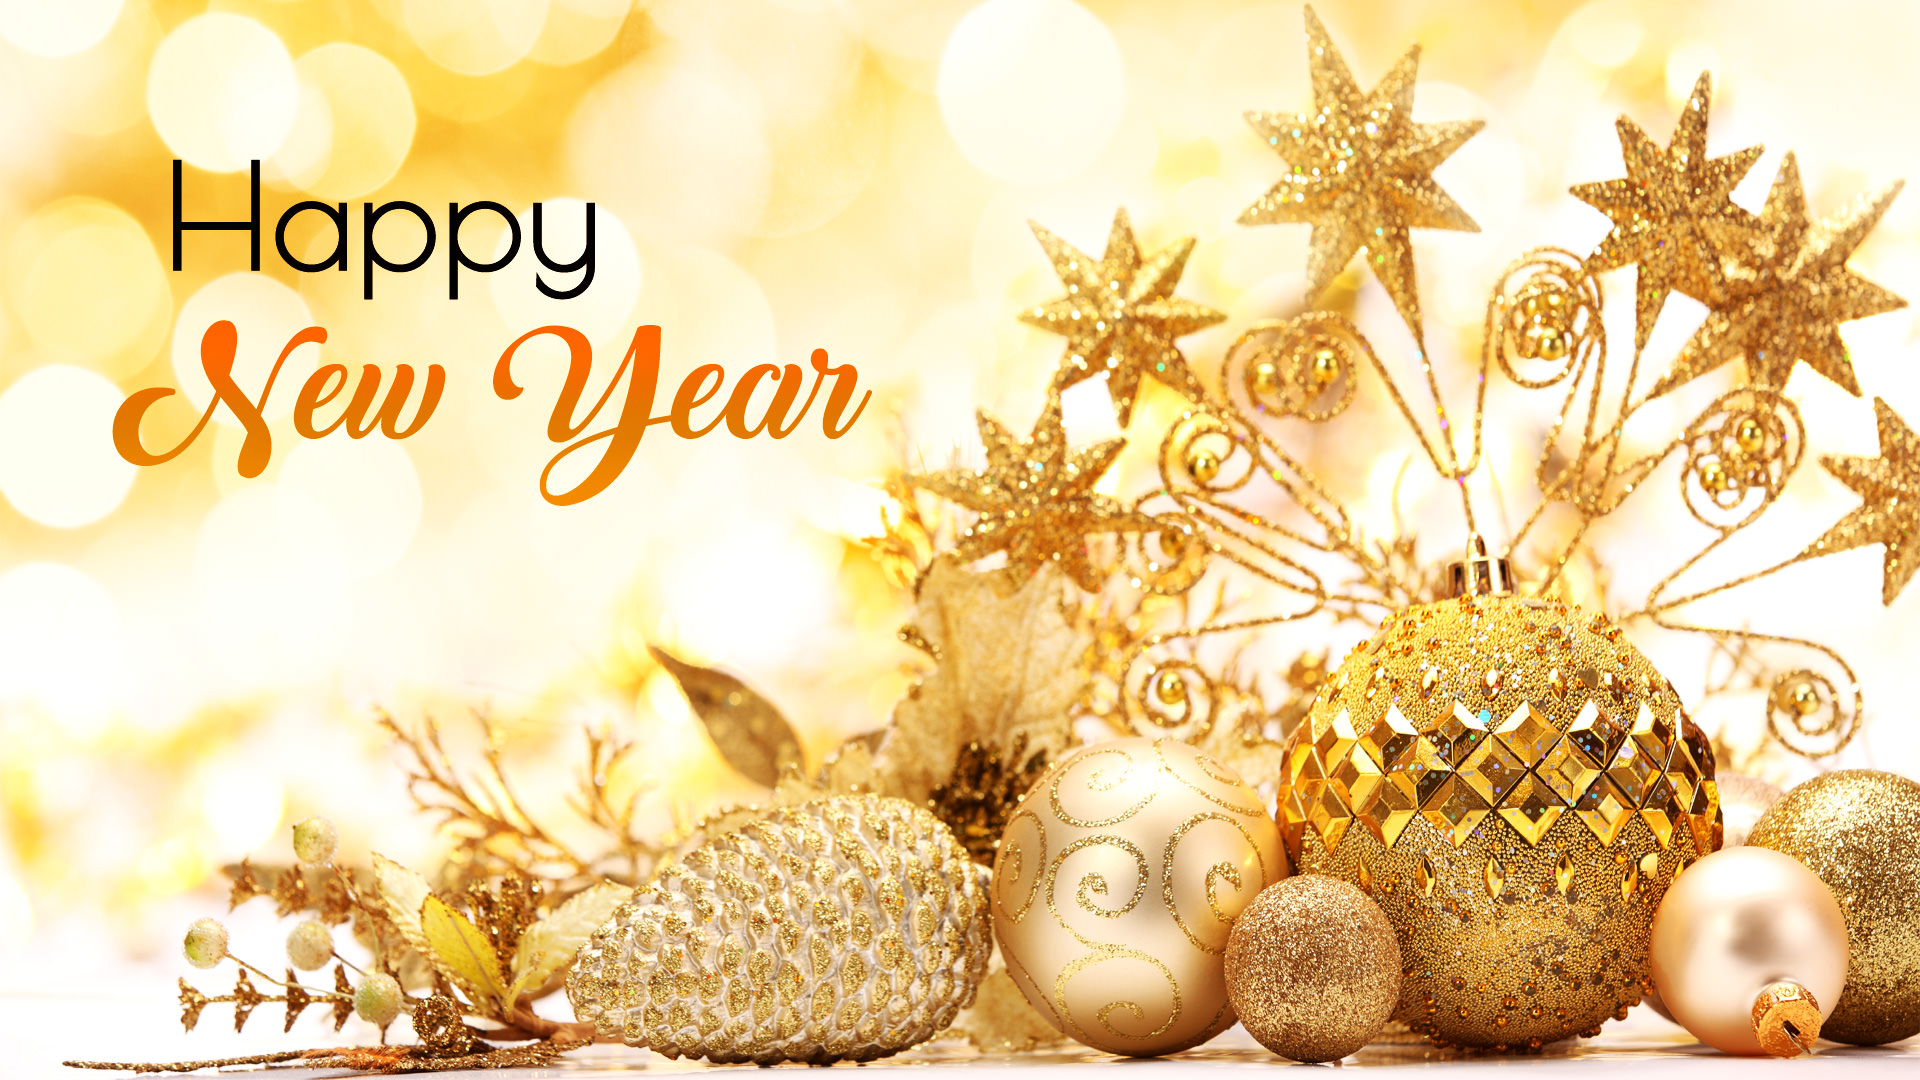 Special Happy New Year 2018 Wallpaper, HD Greetings ...